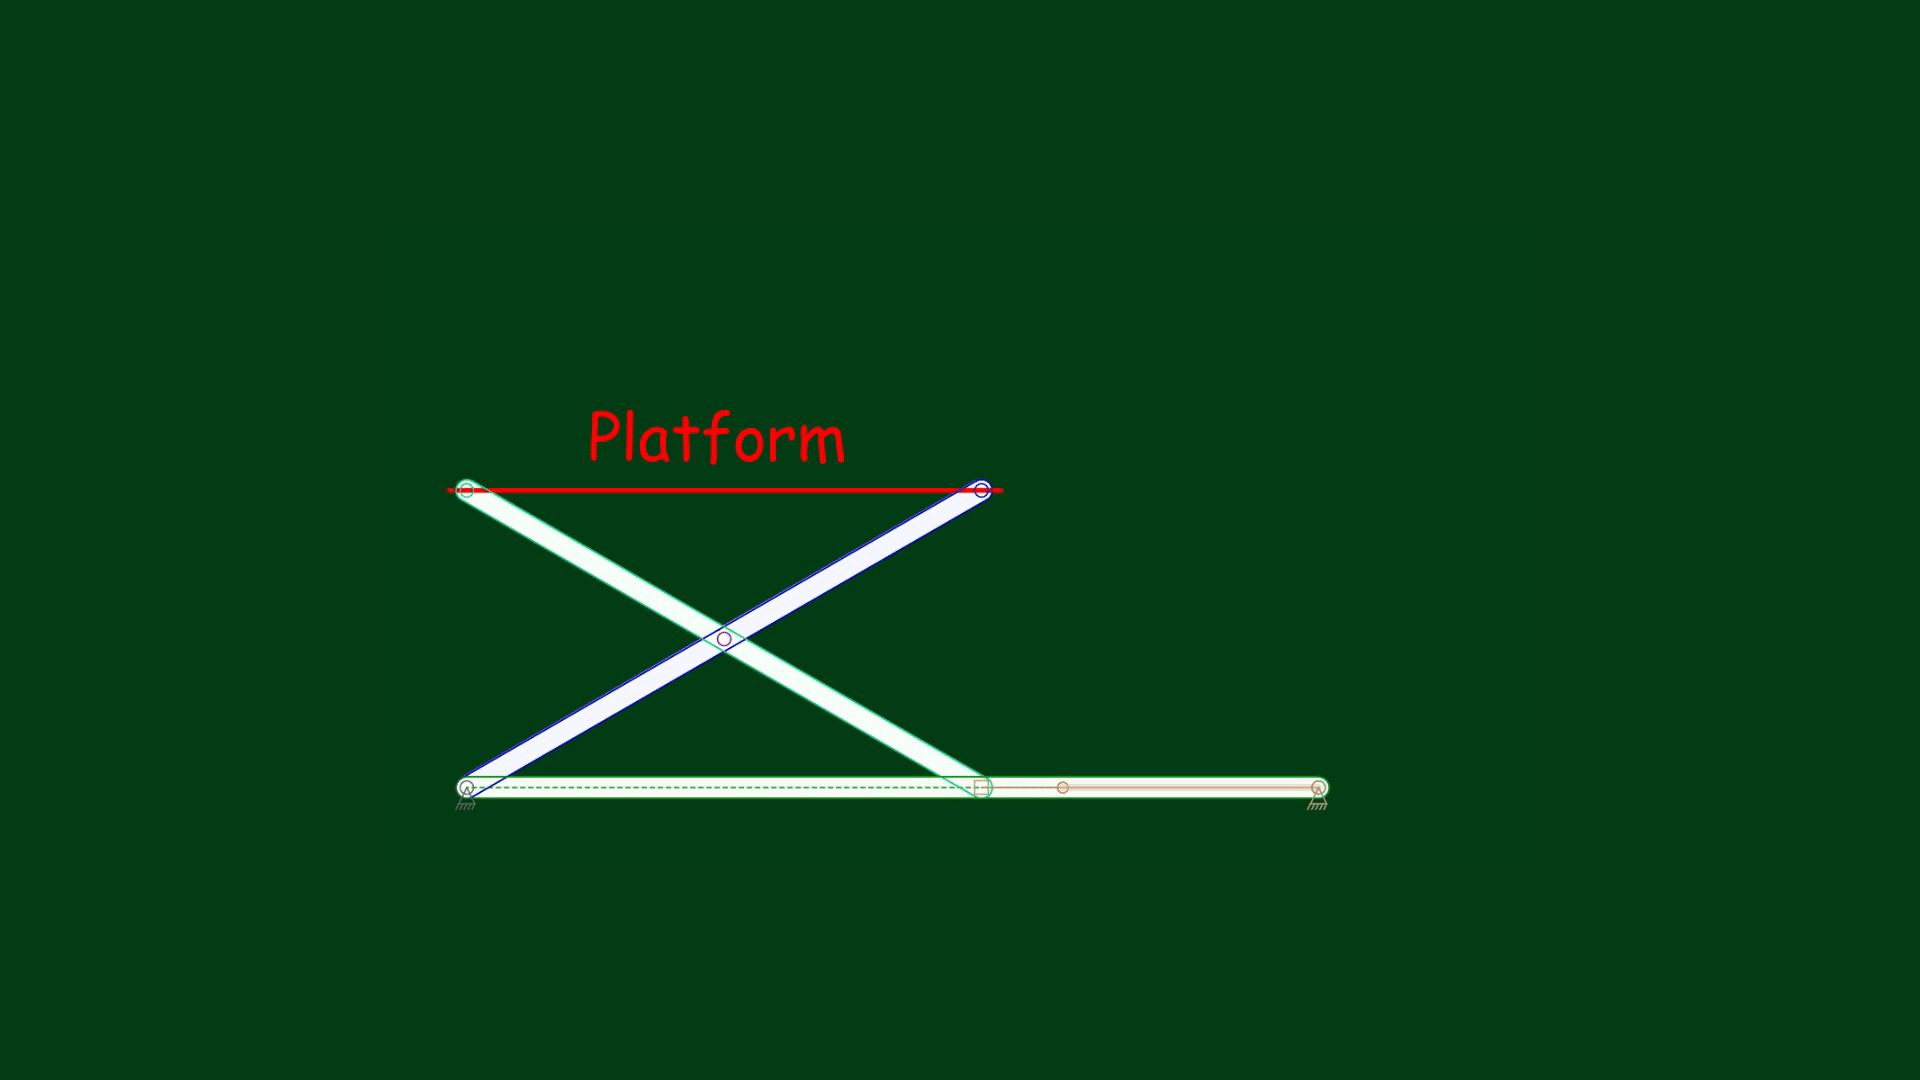 Moving the platform up and down with a simple scissors linkage model.